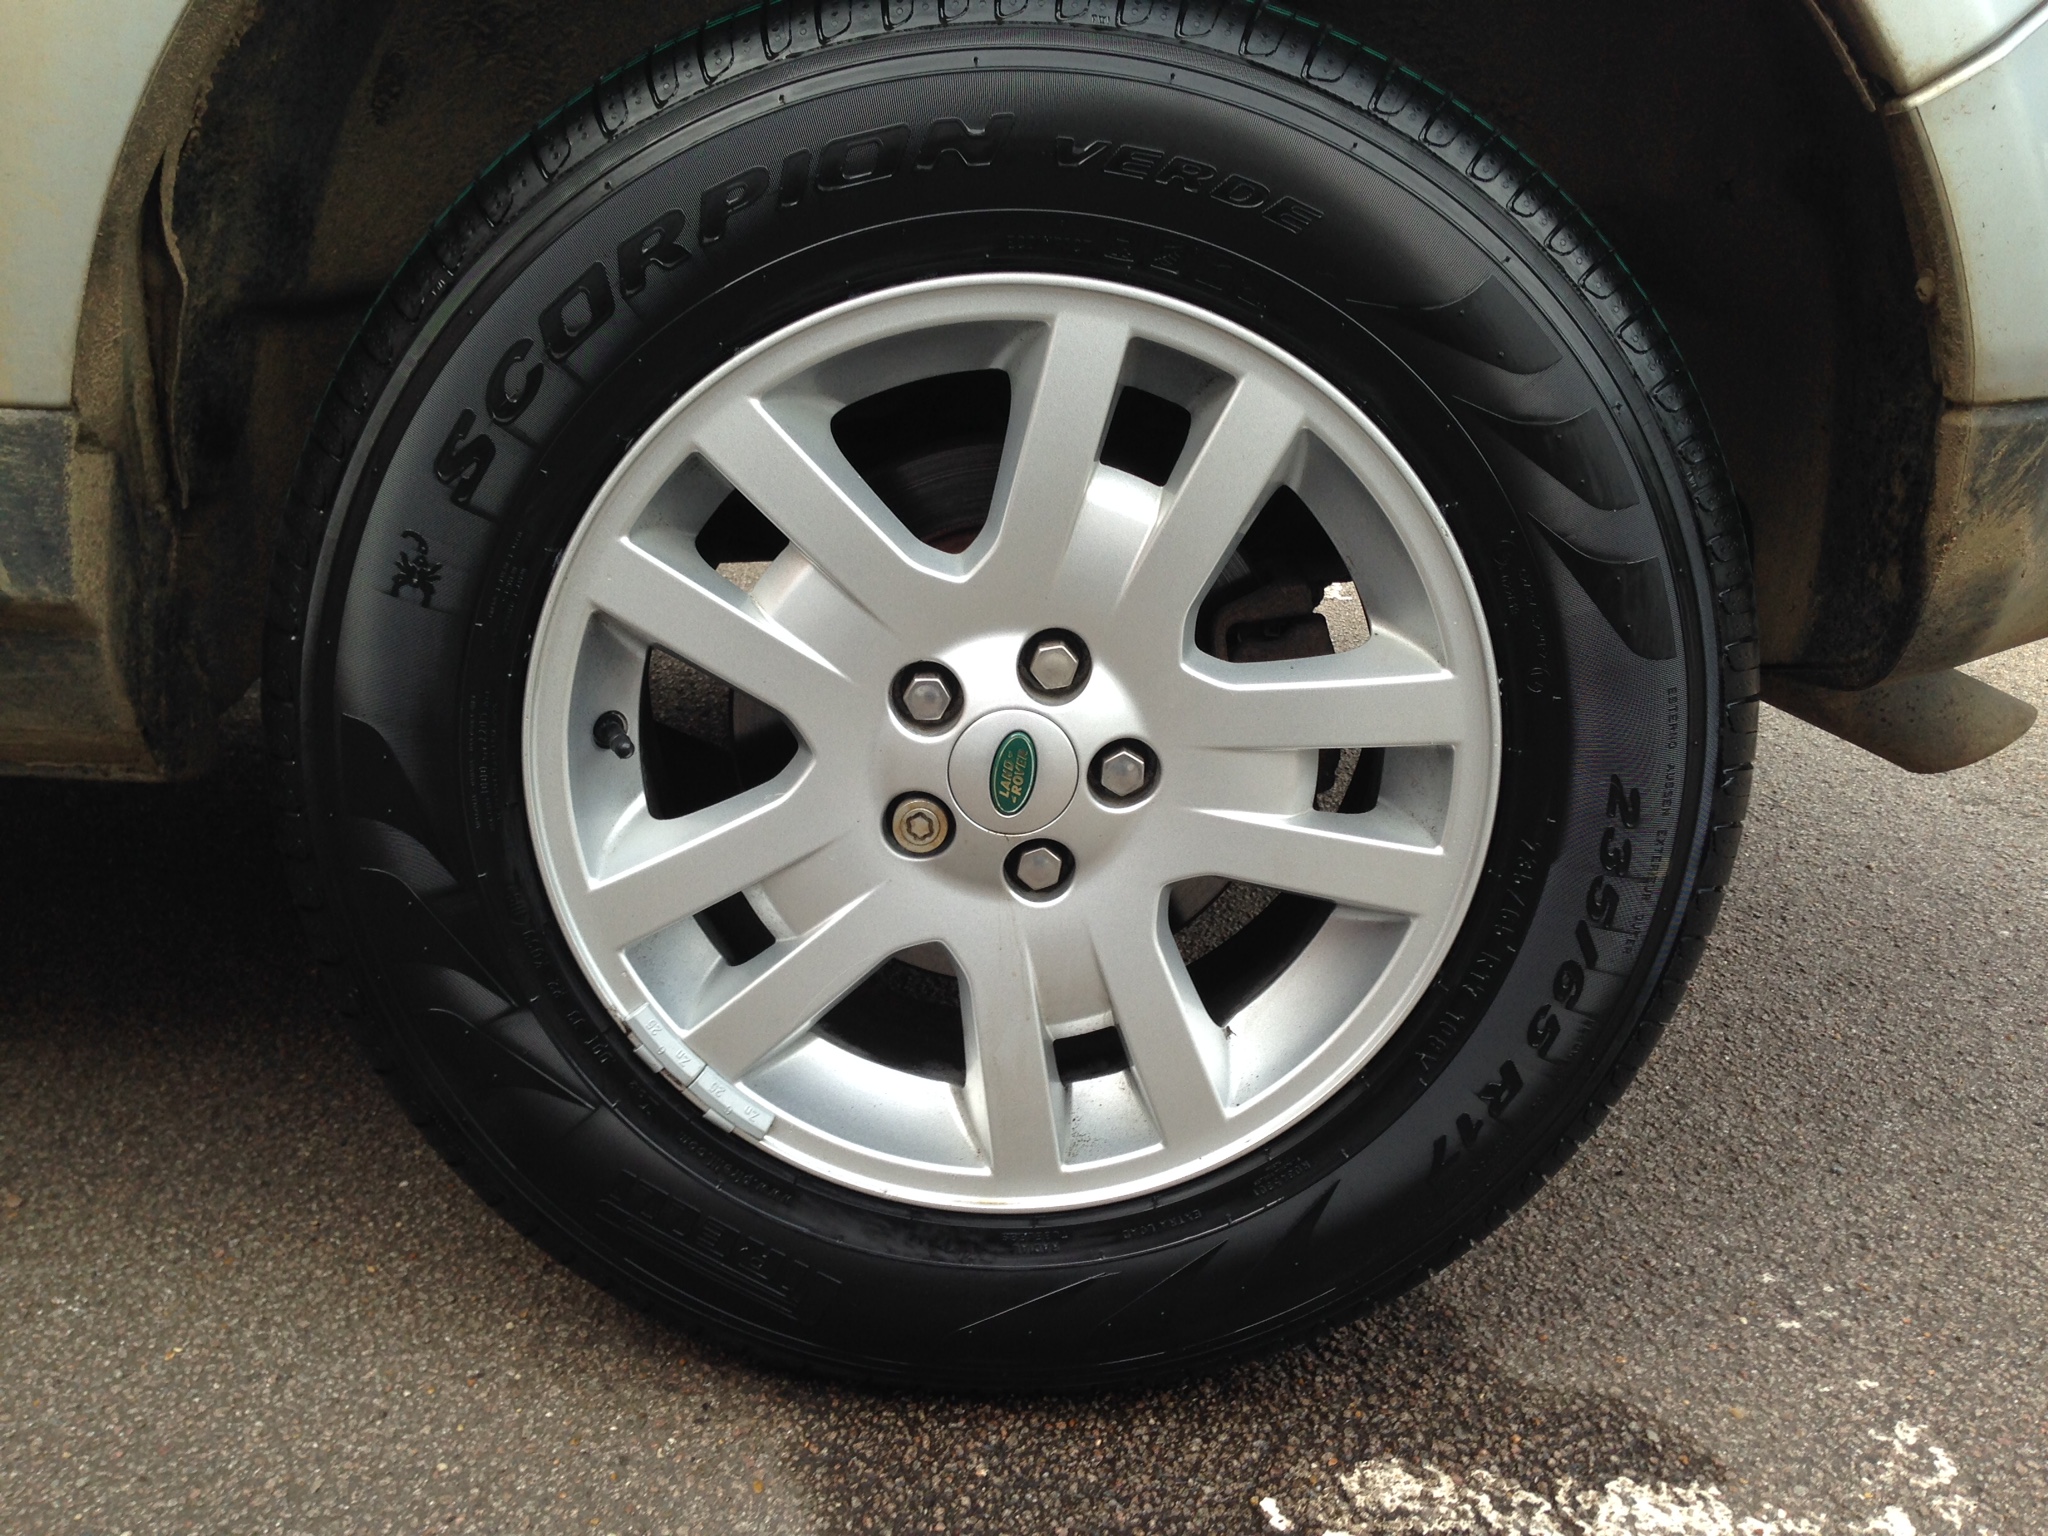 Tyre dressing and alloy wheel cleaned after new tyre fitted.JPG